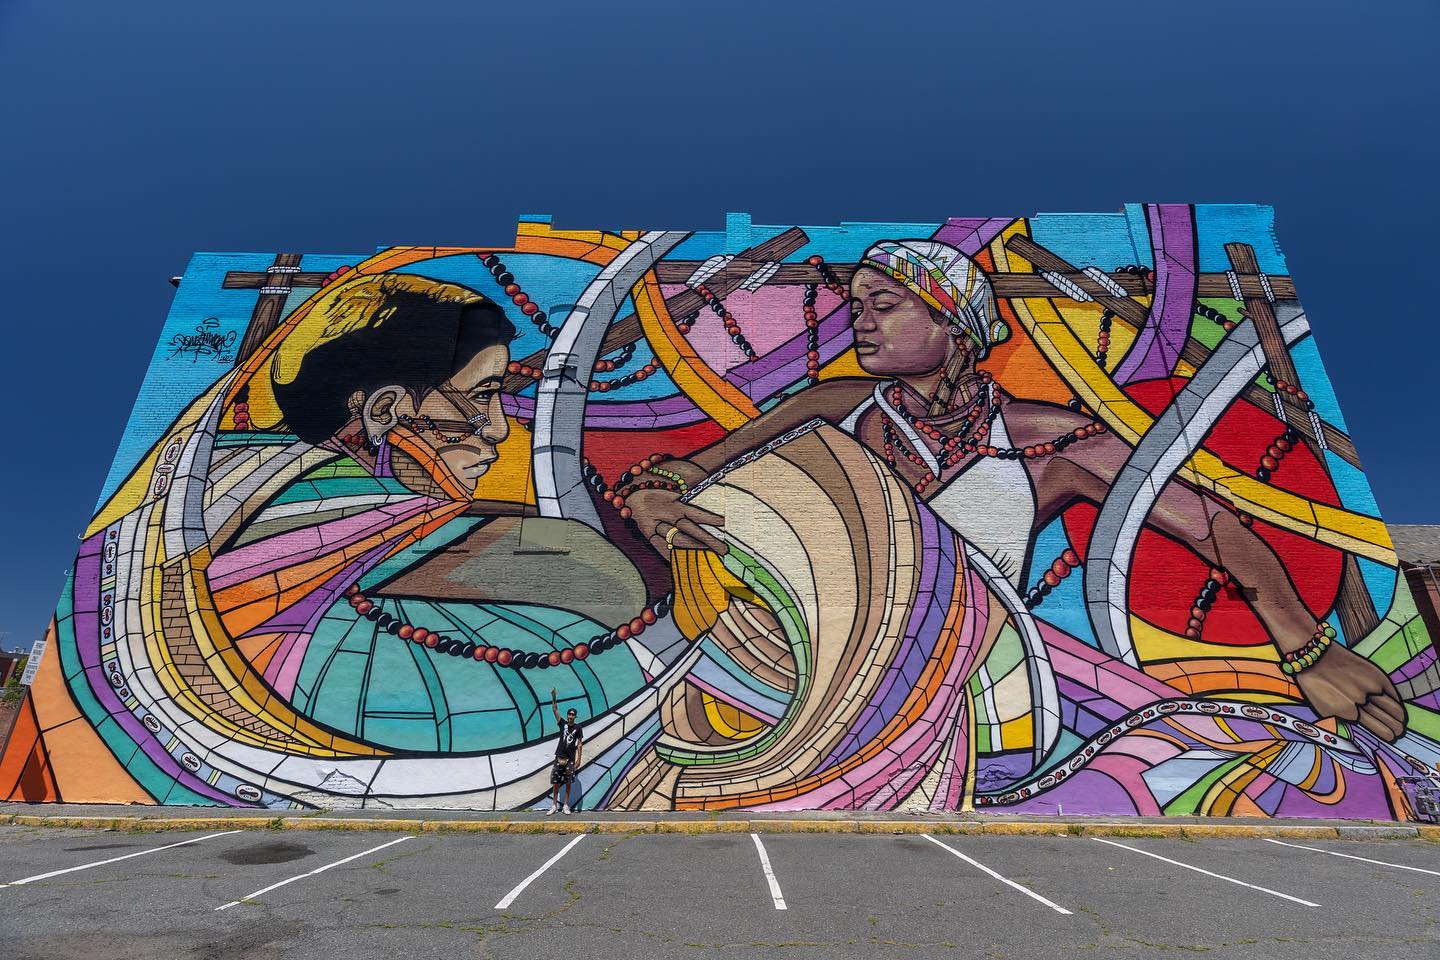 New mural at Ferro Carril Oeste by Ene Ene and Malegria